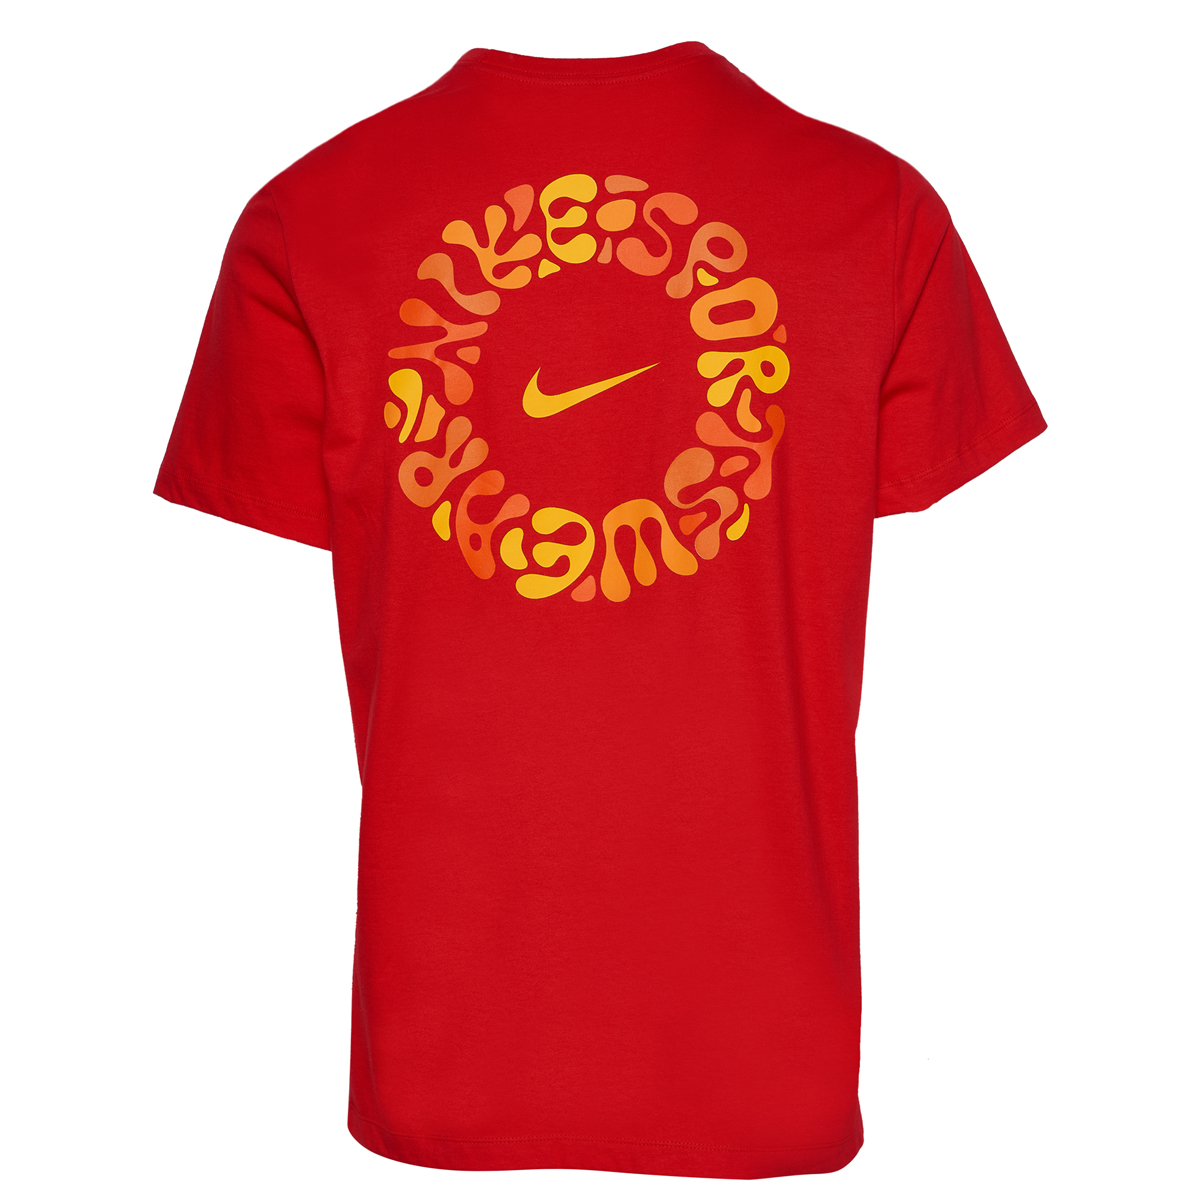 Nike-Squiggles-T-Shirt-Red-Yellow-2